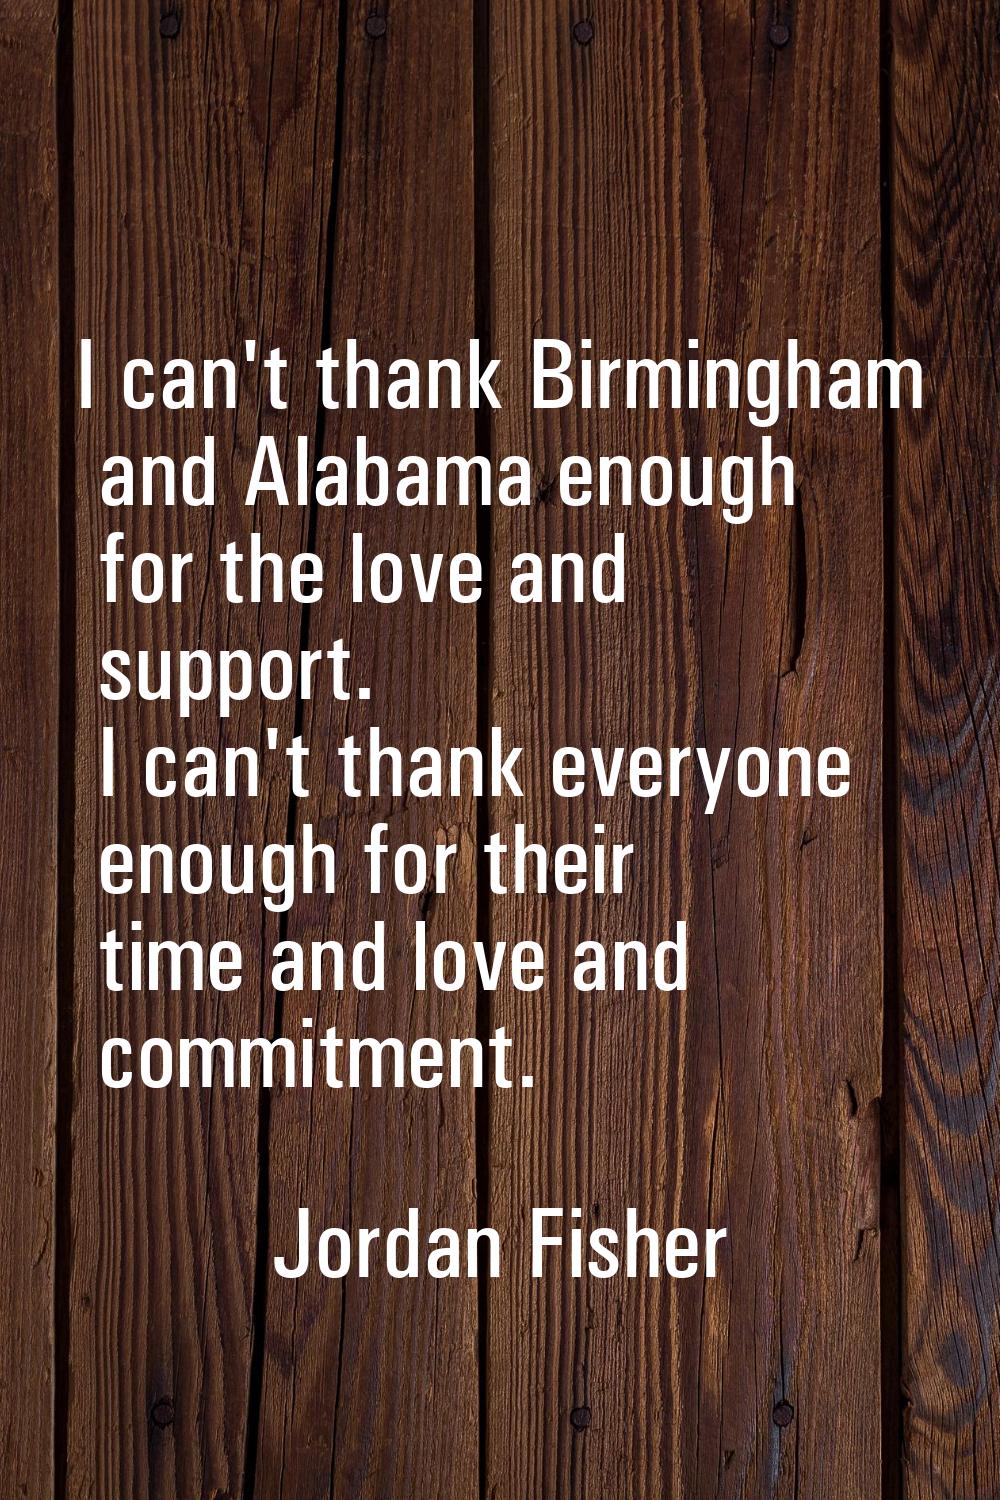 I can't thank Birmingham and Alabama enough for the love and support. I can't thank everyone enough